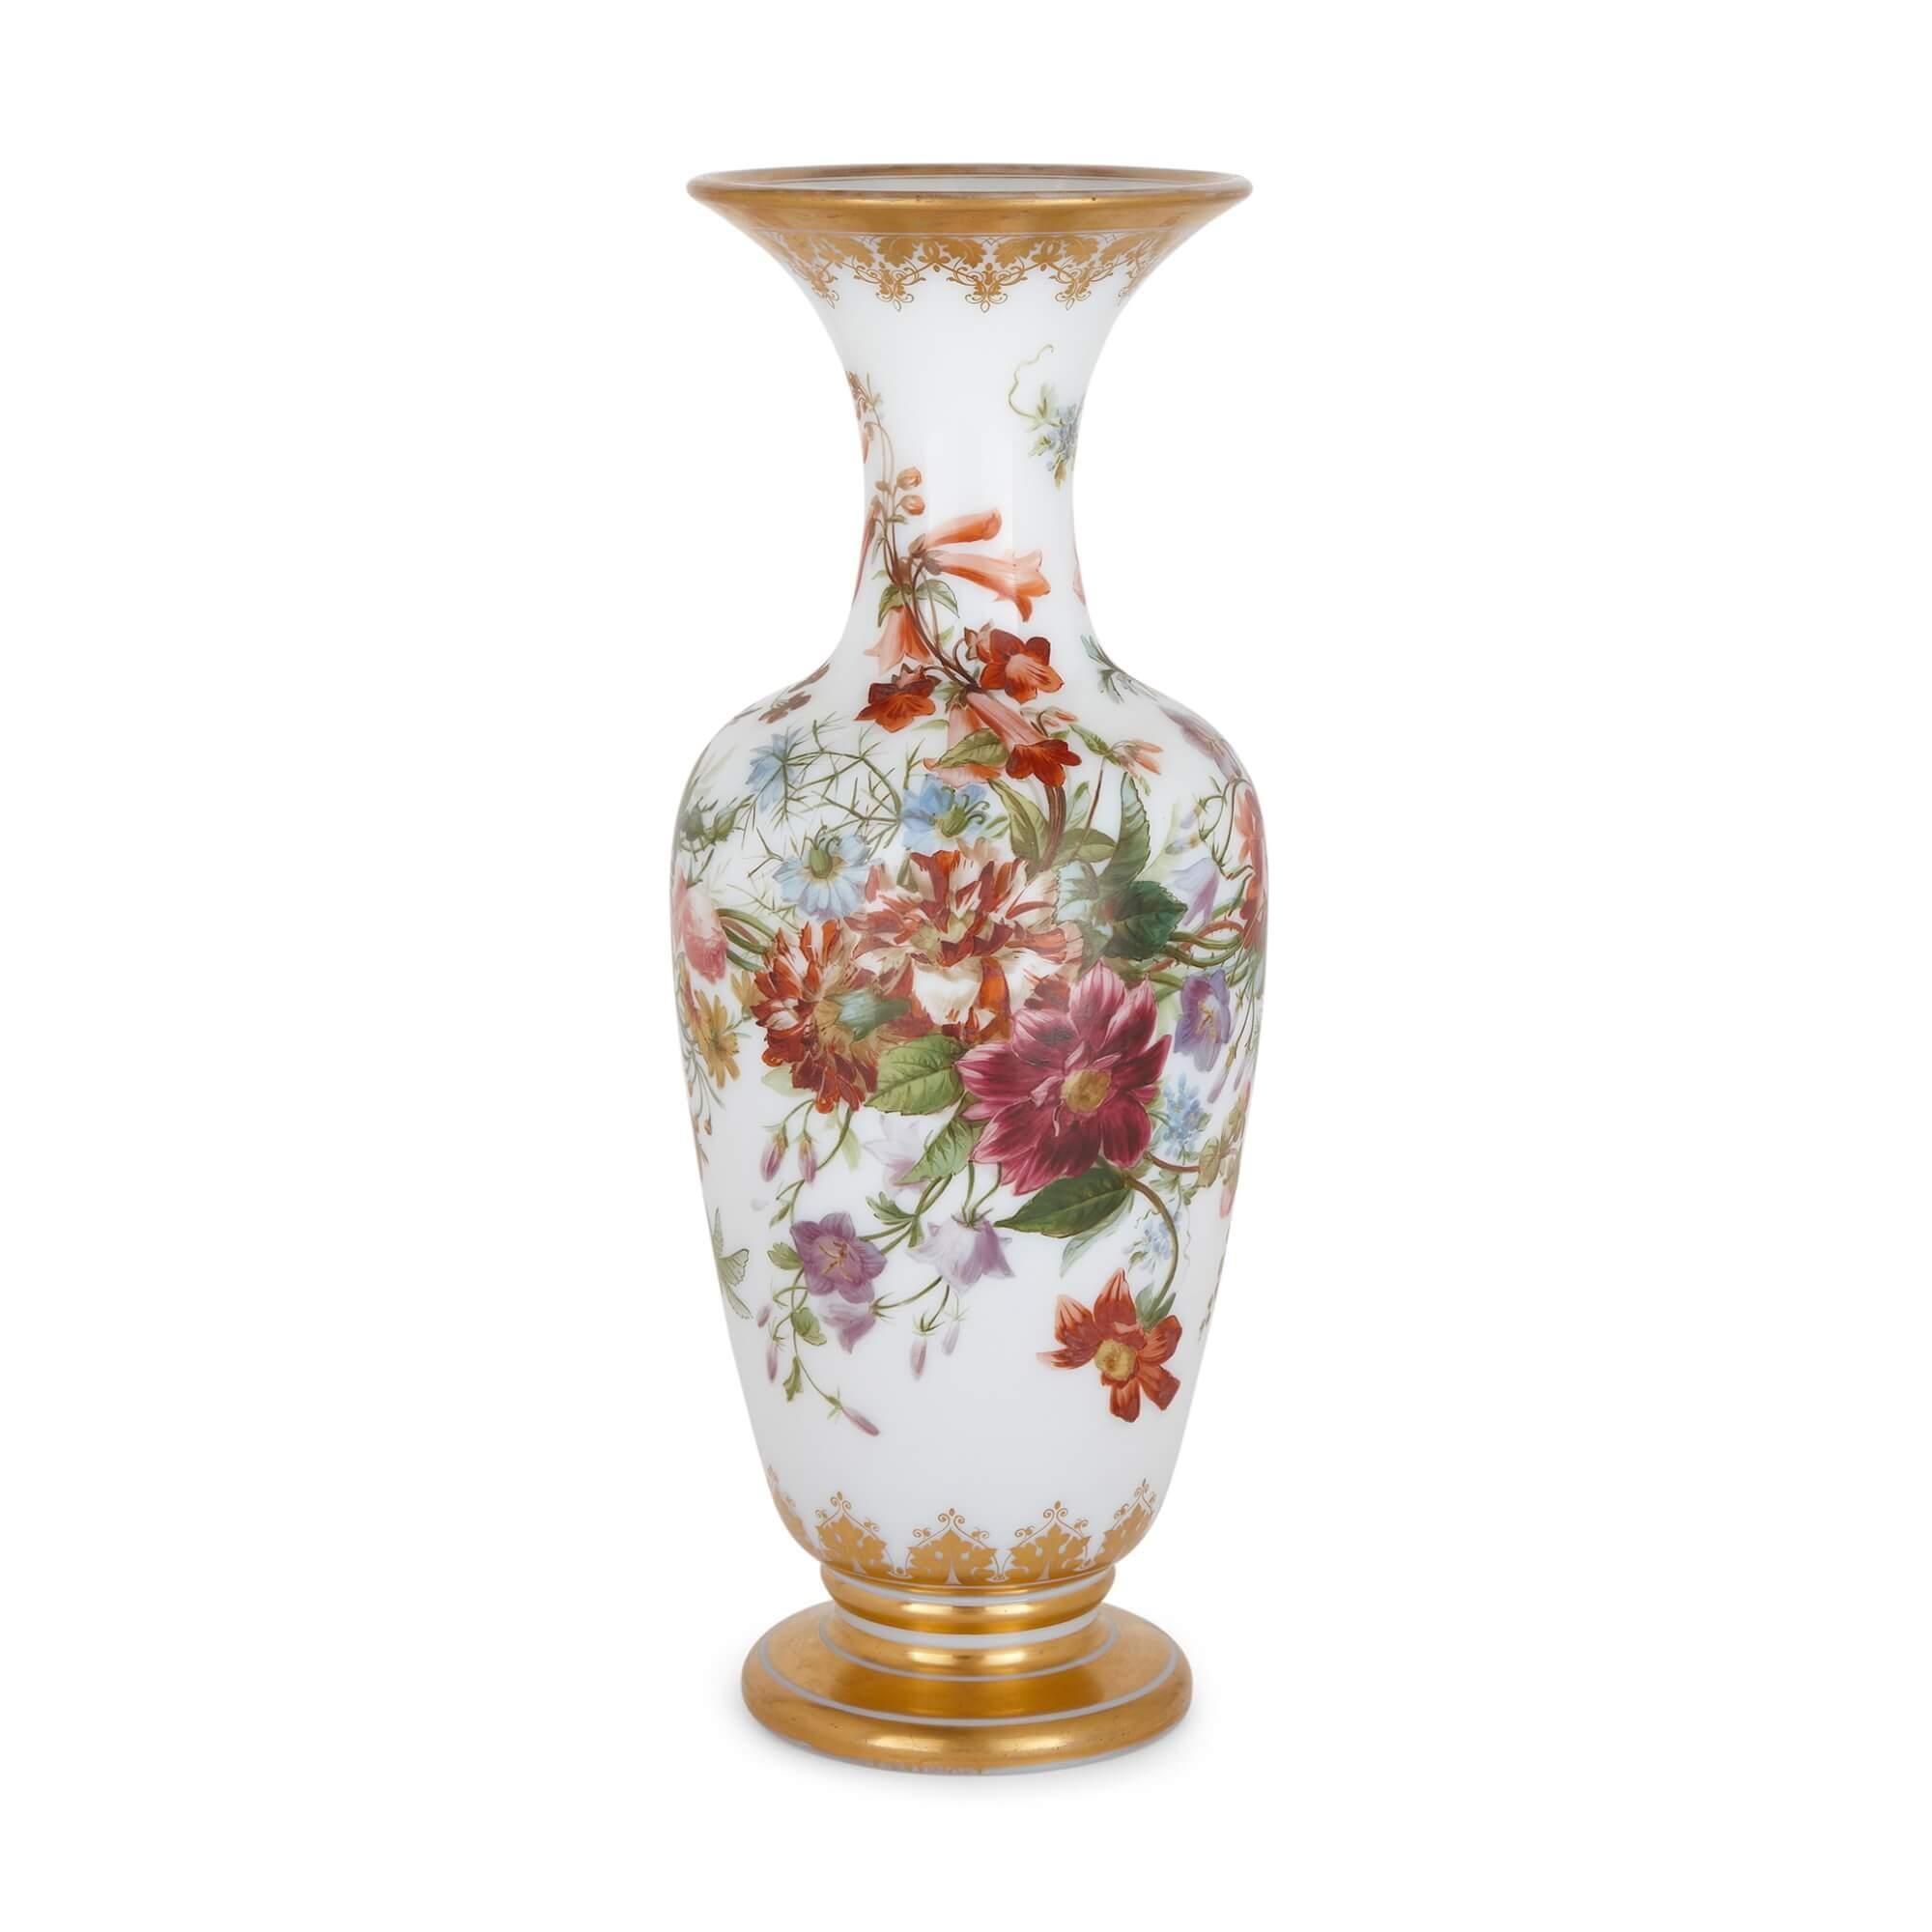 Floral painted antique glass vase by Baccarat.
French, 19th century.
Measures: height 45cm, diameter 18cm.

By the exceptionally highly-regarded French maker Baccarat, this beautiful vase is made from glass and florally decorated with